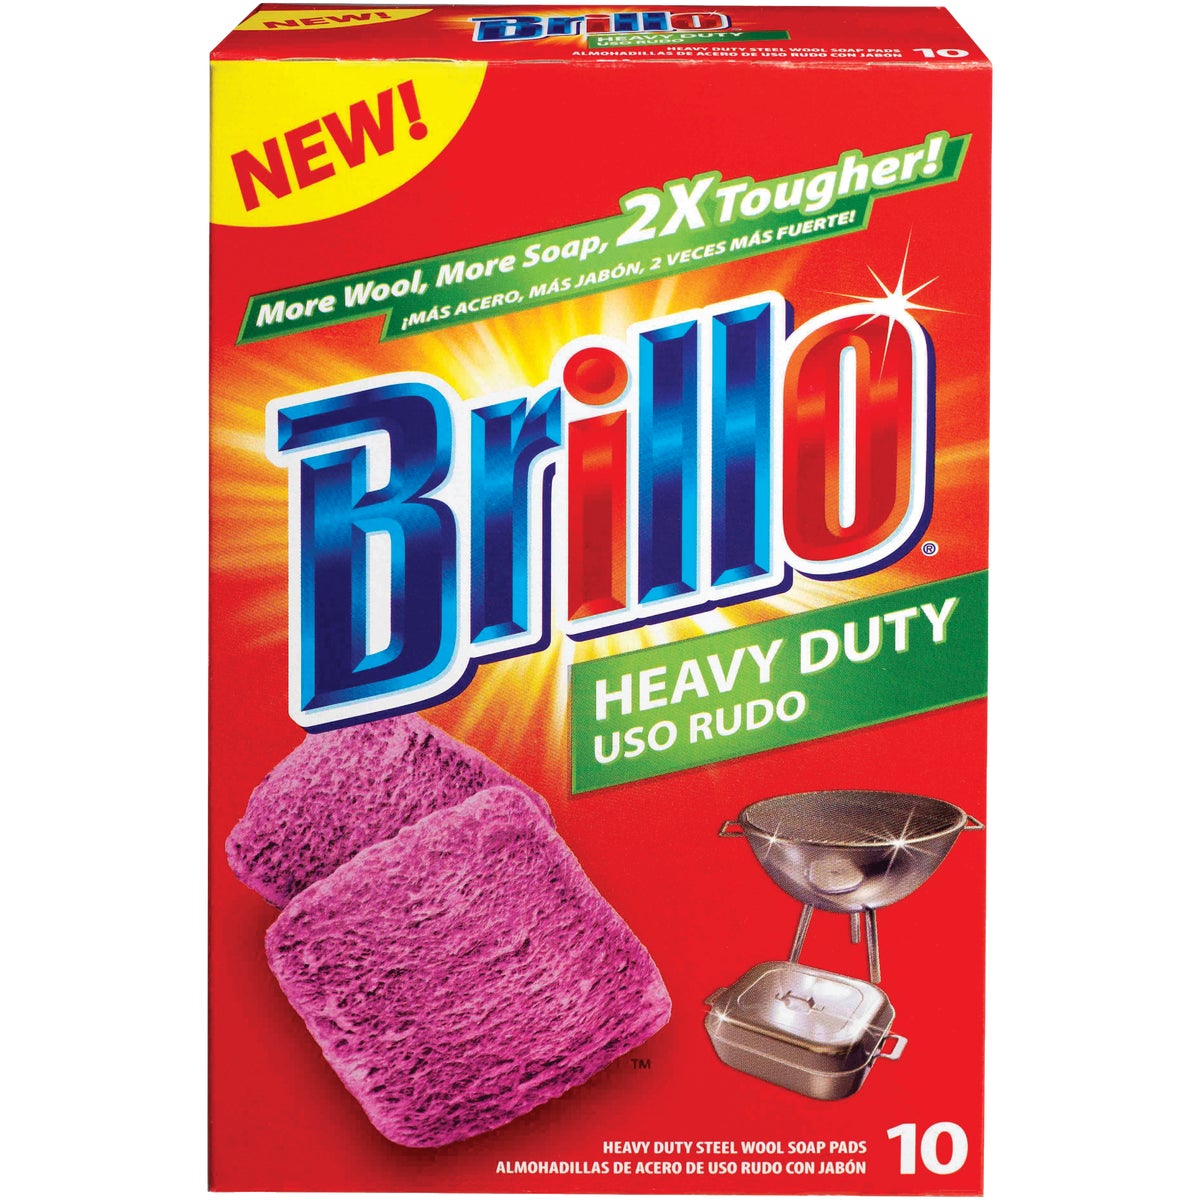 Brillo Heavy Duty Steel Wool Scouring Pad (10 Count)